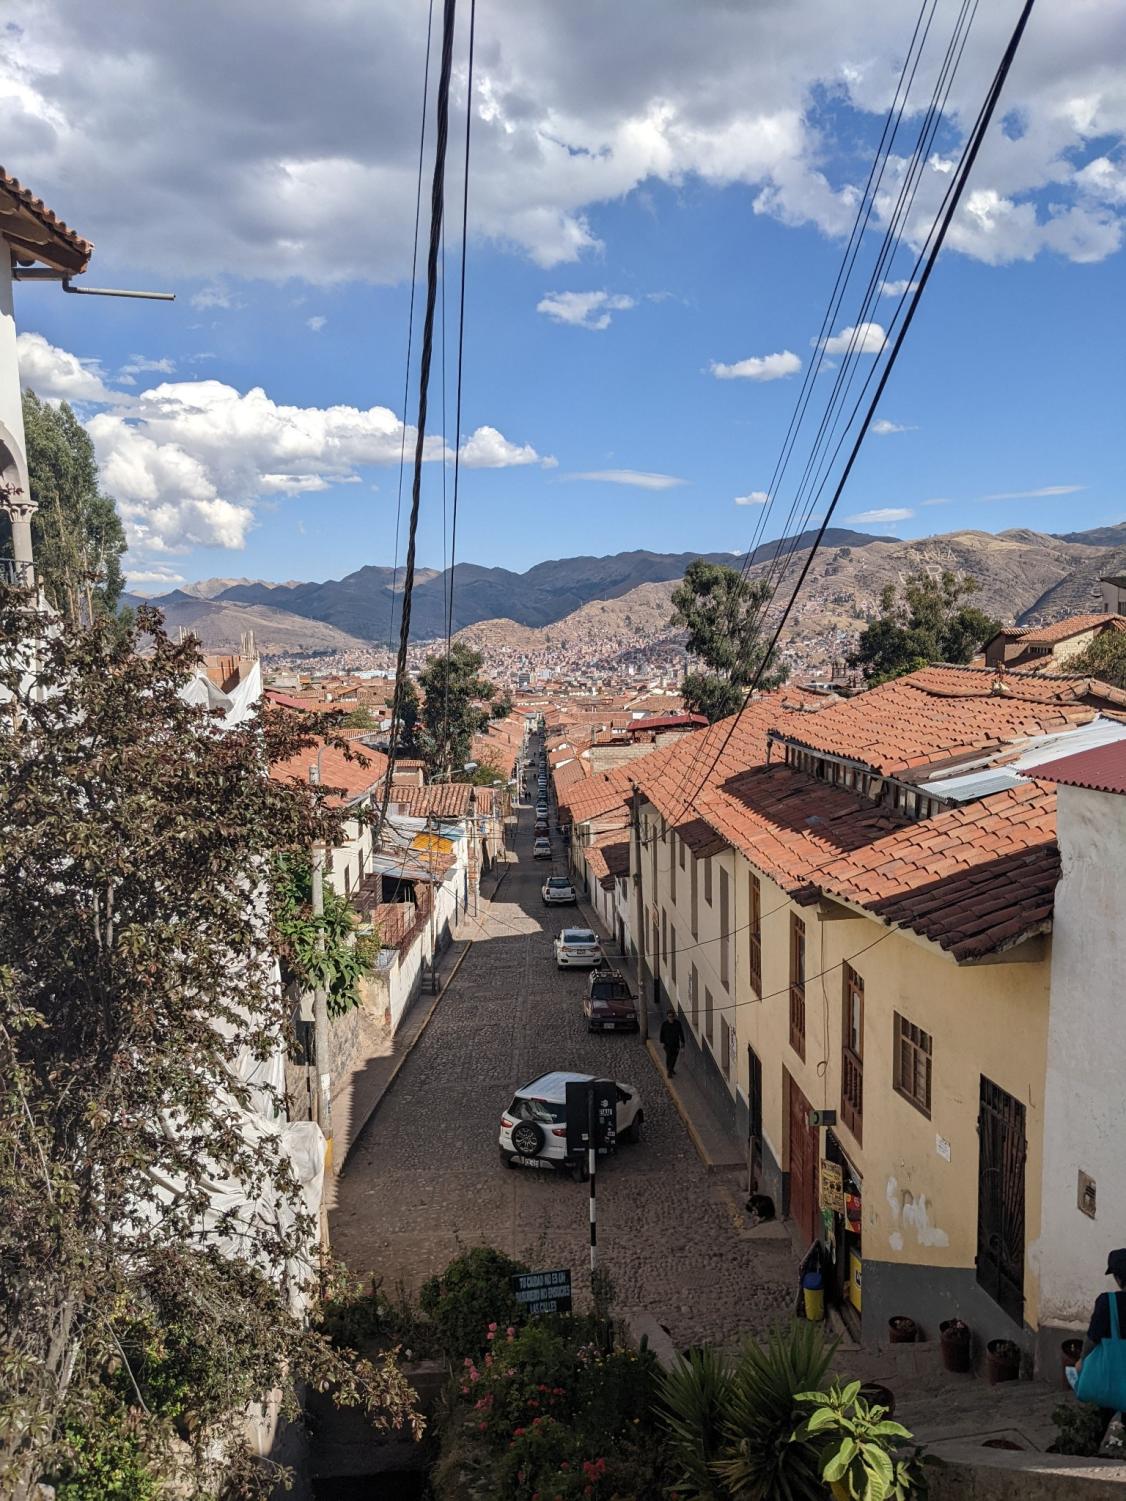 This is a wide view down a street in San Blas, Cusco. During the time Berry was there, many transportation strikes happened that left him dependent on walking as his main source of transportation.